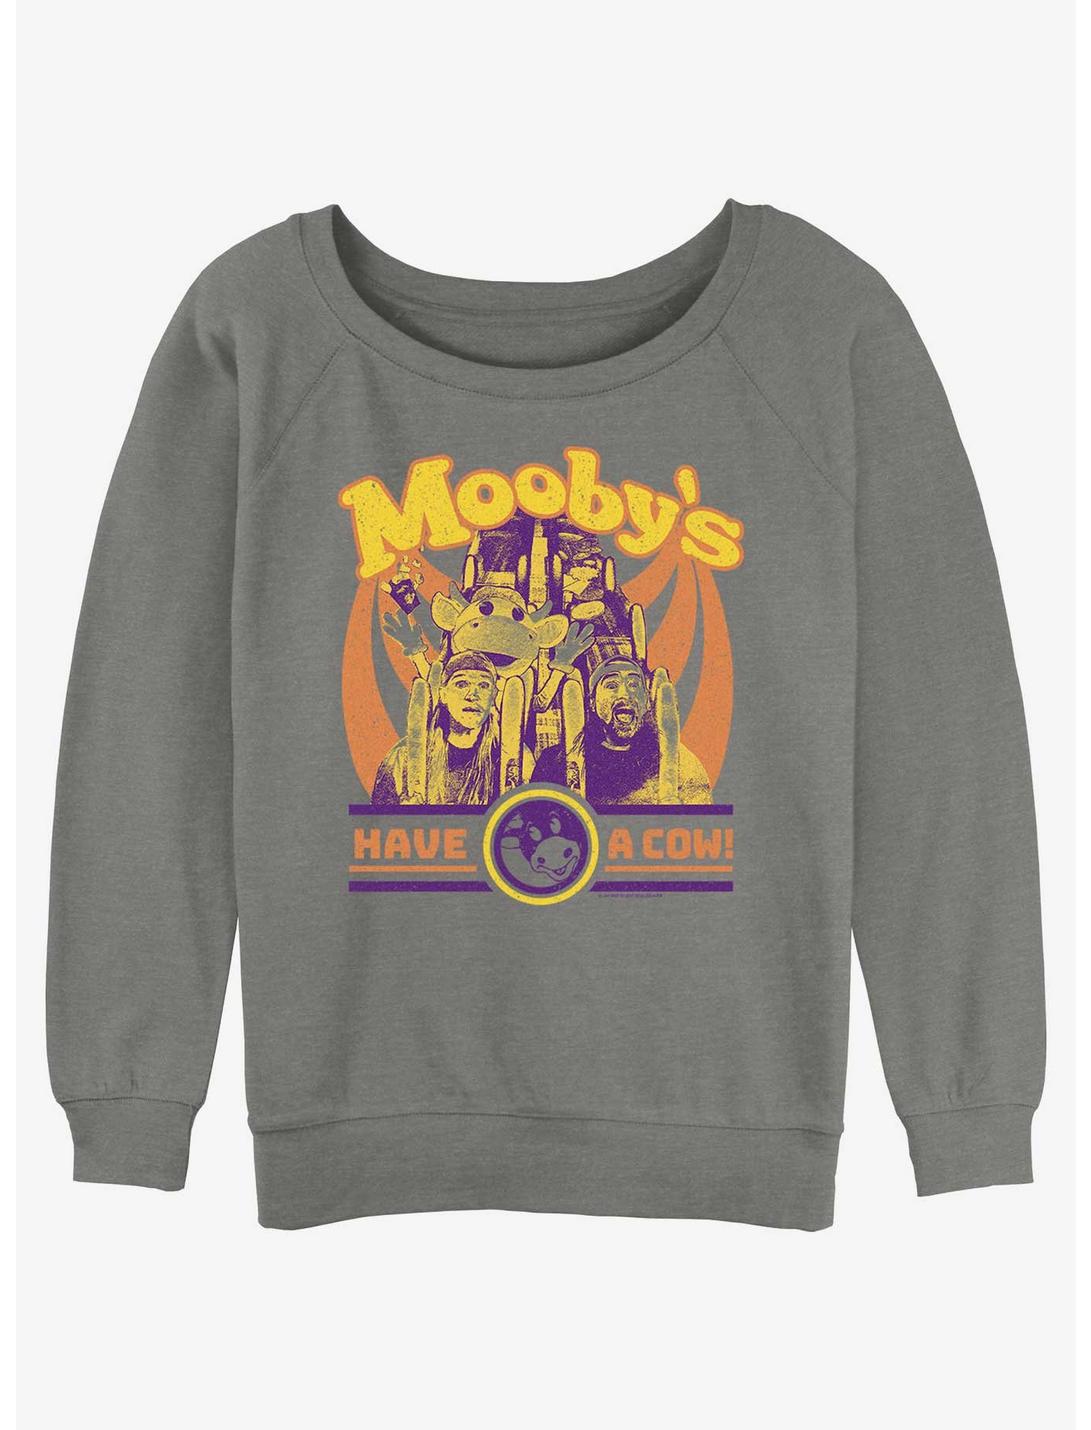 Jay and Silent Bob Mooby's Have A Cow Girls Slouchy Sweatshirt, GRAY HTR, hi-res